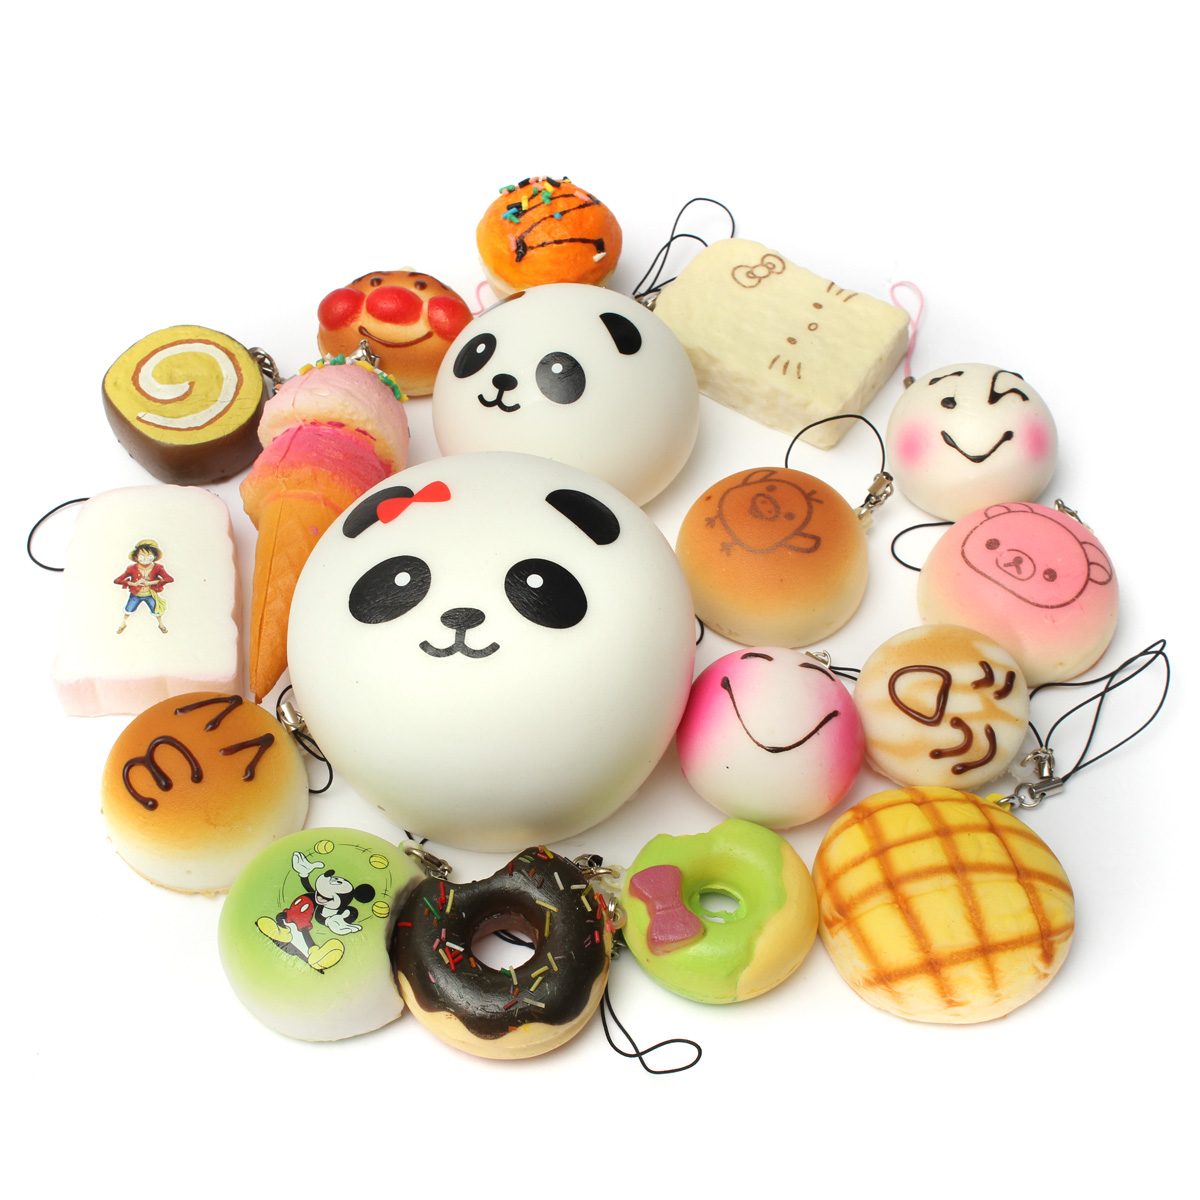 18PCS-Squishy-Christmas-Gift-Decor-Panda-Cup-Cake-Toasts-Buns-Donuts-Random-Soft-Cell-Phone-Straps-1069615-3